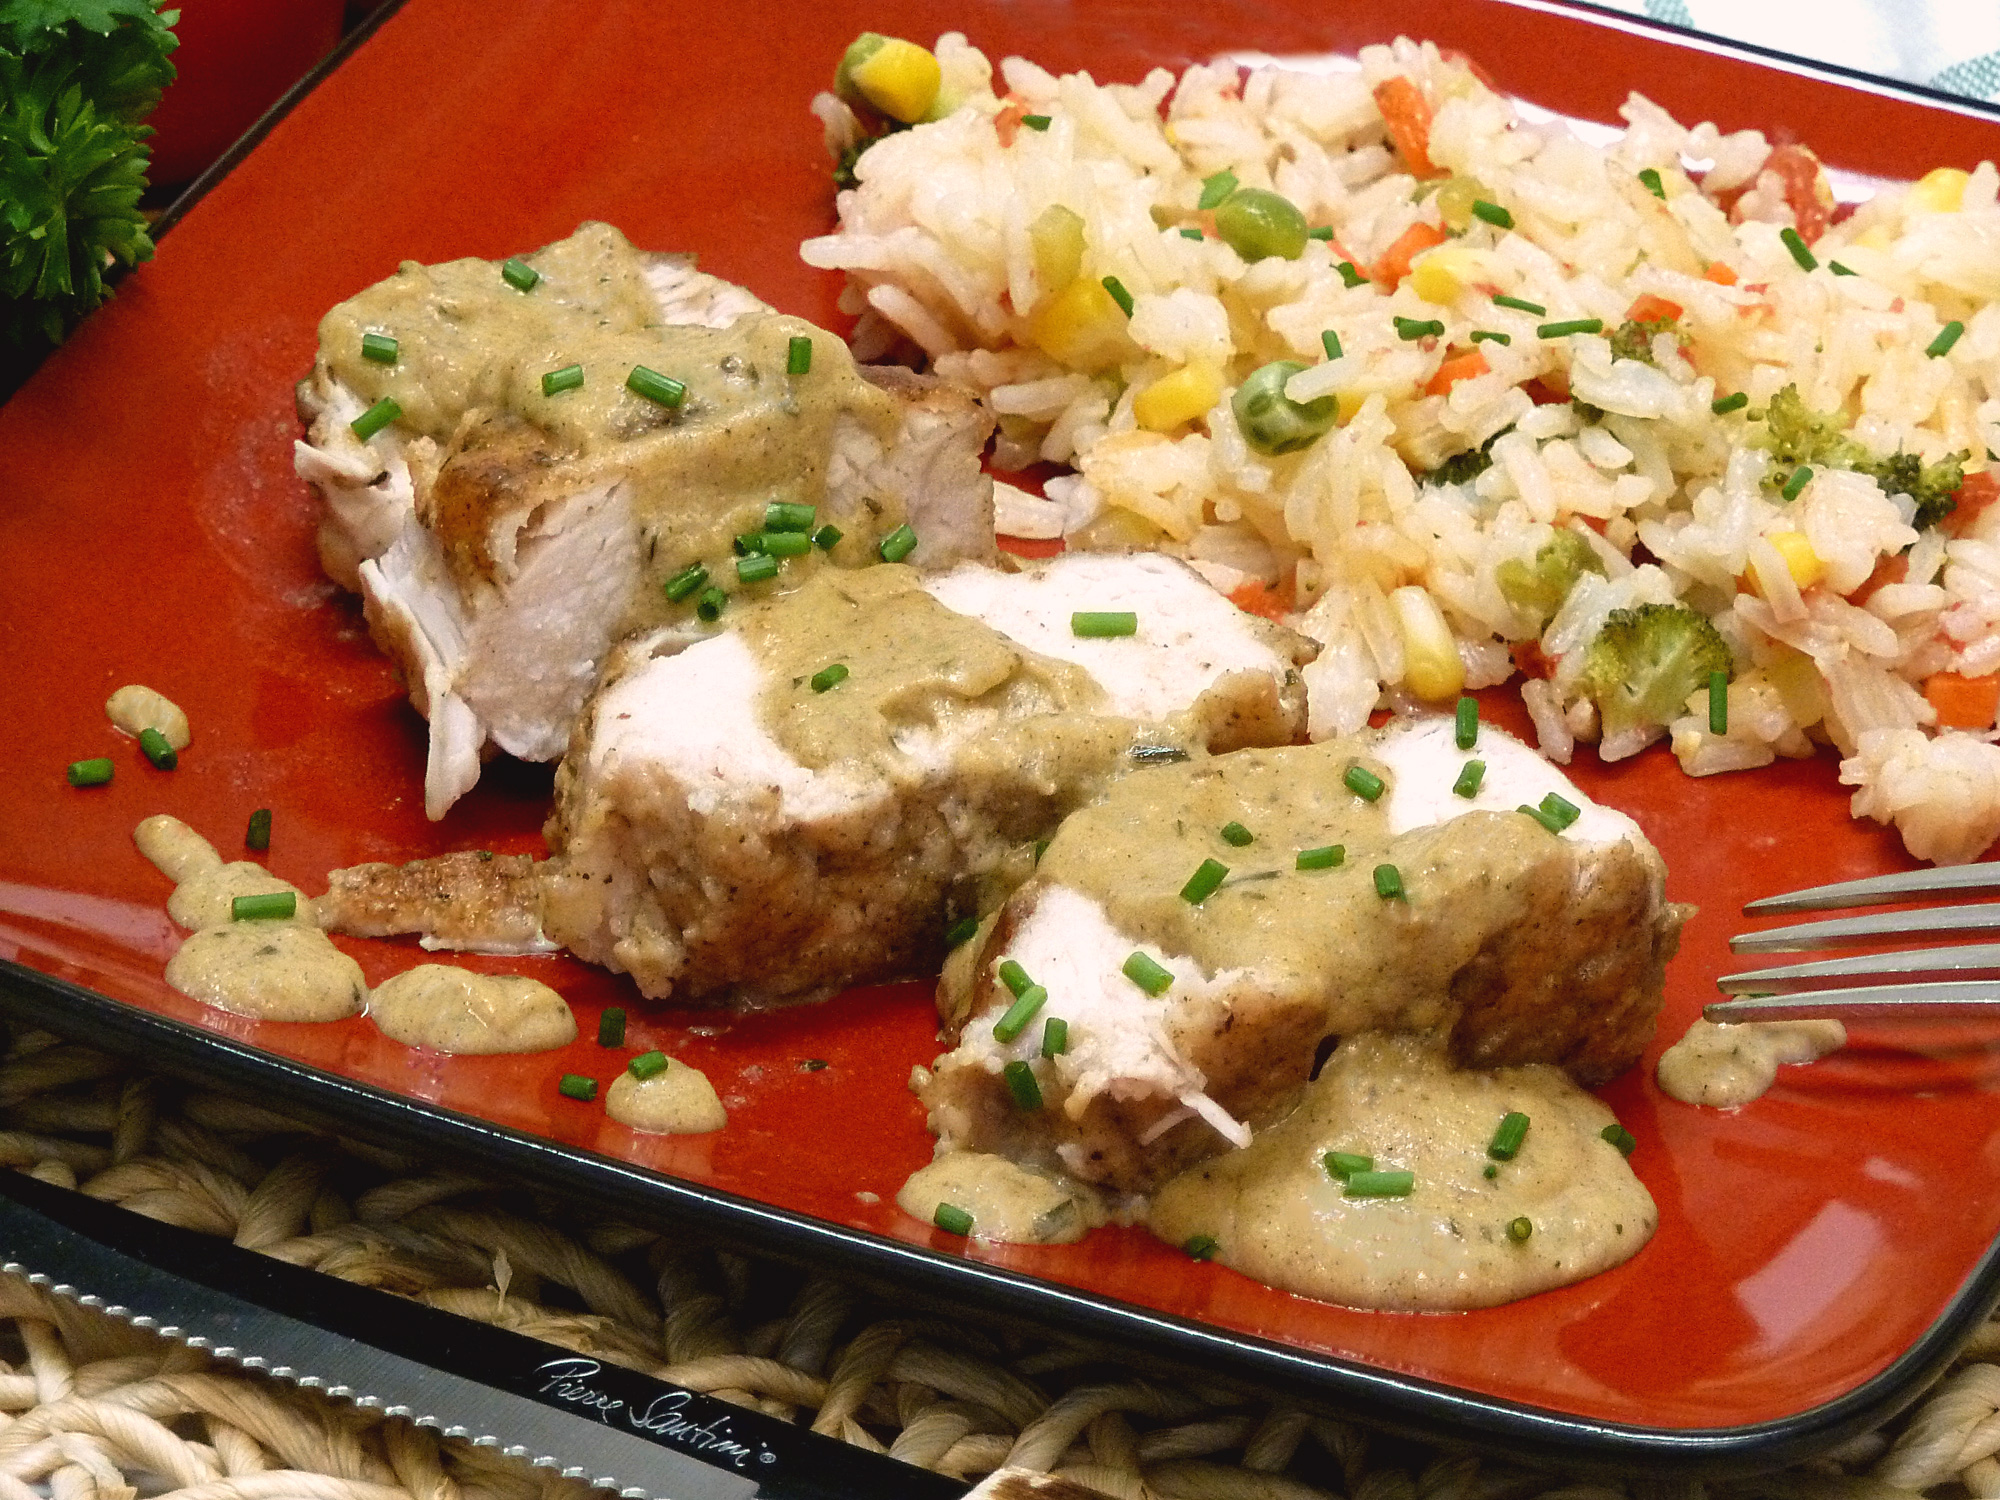 Boneless chicken breast with a honey Dijon mustard sauce is to die for.